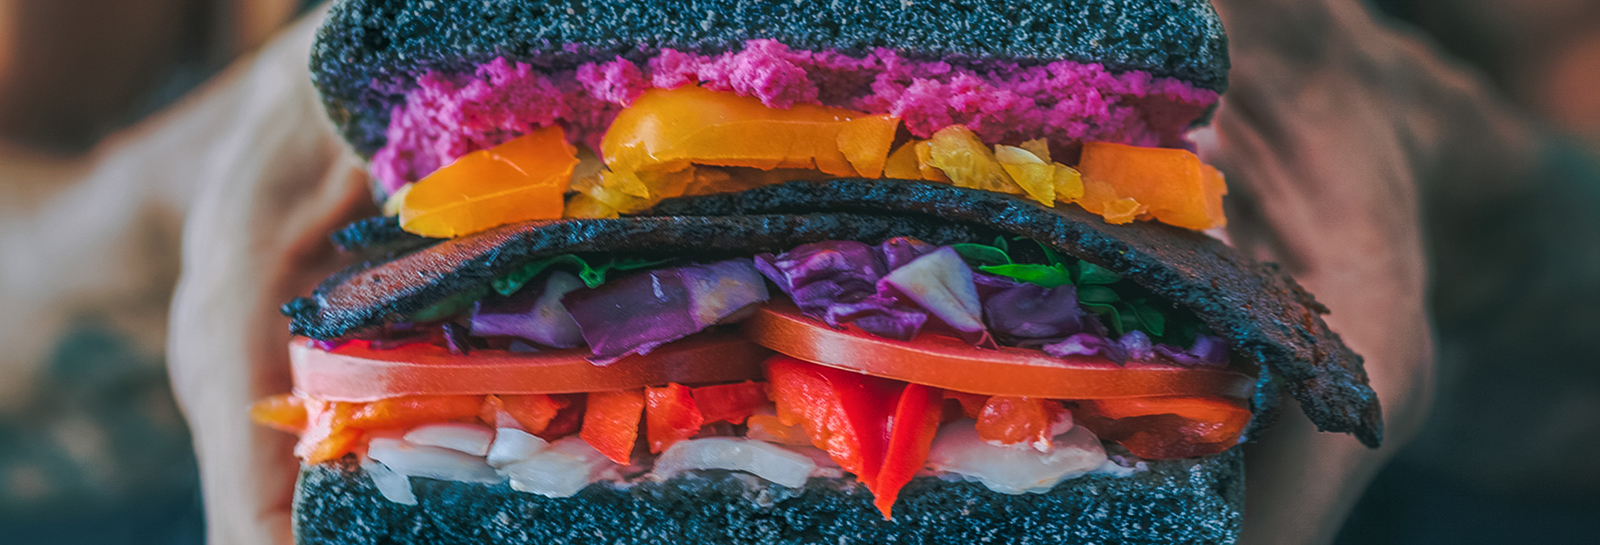 hands holding a sandwitch made with black bread and colorful fillings